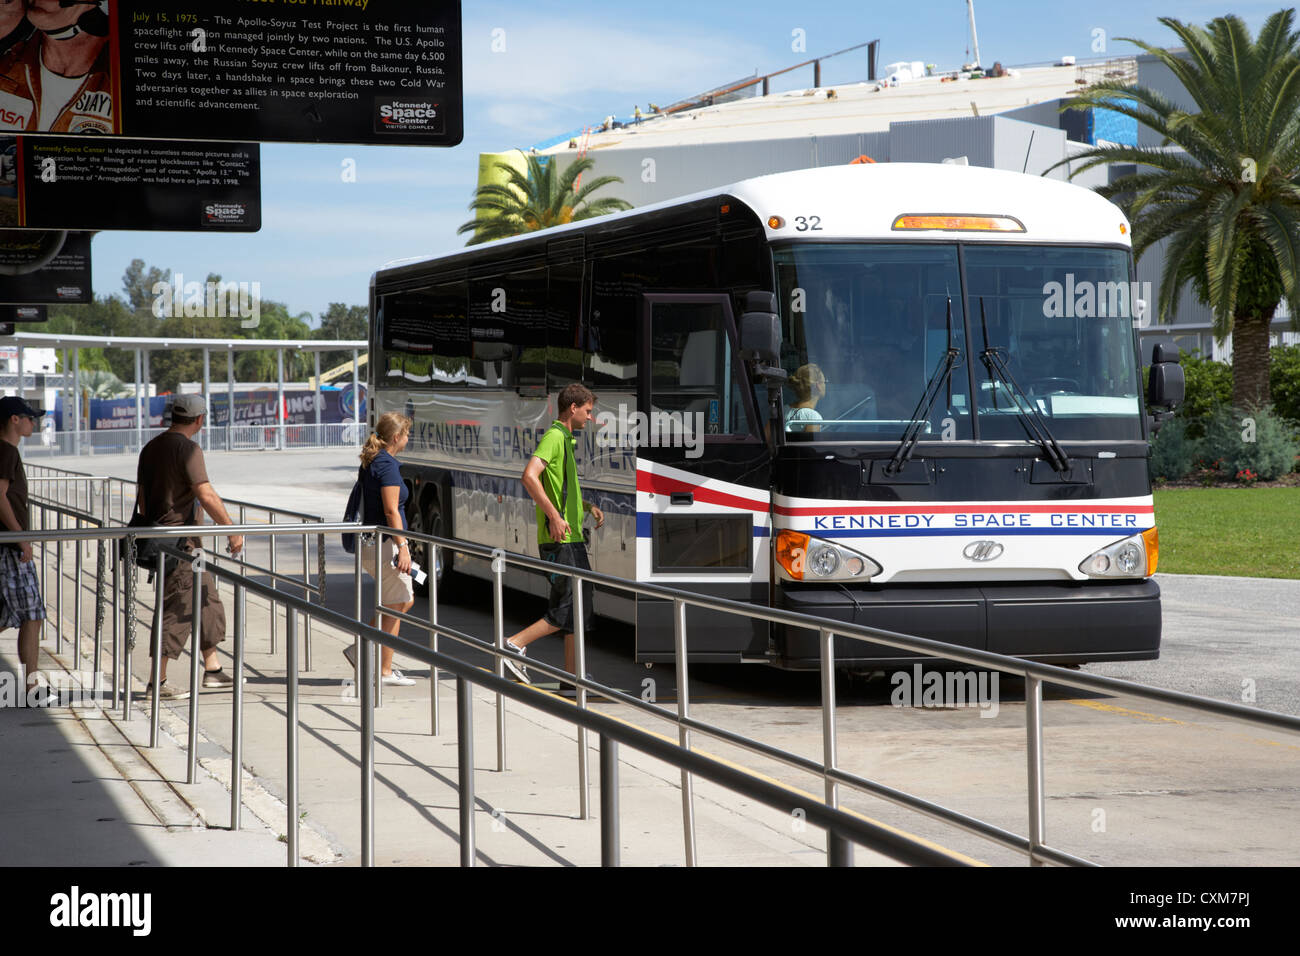 visitors boarding a bus for a guided tour of Kennedy Space Center Florida USA Stock Photo